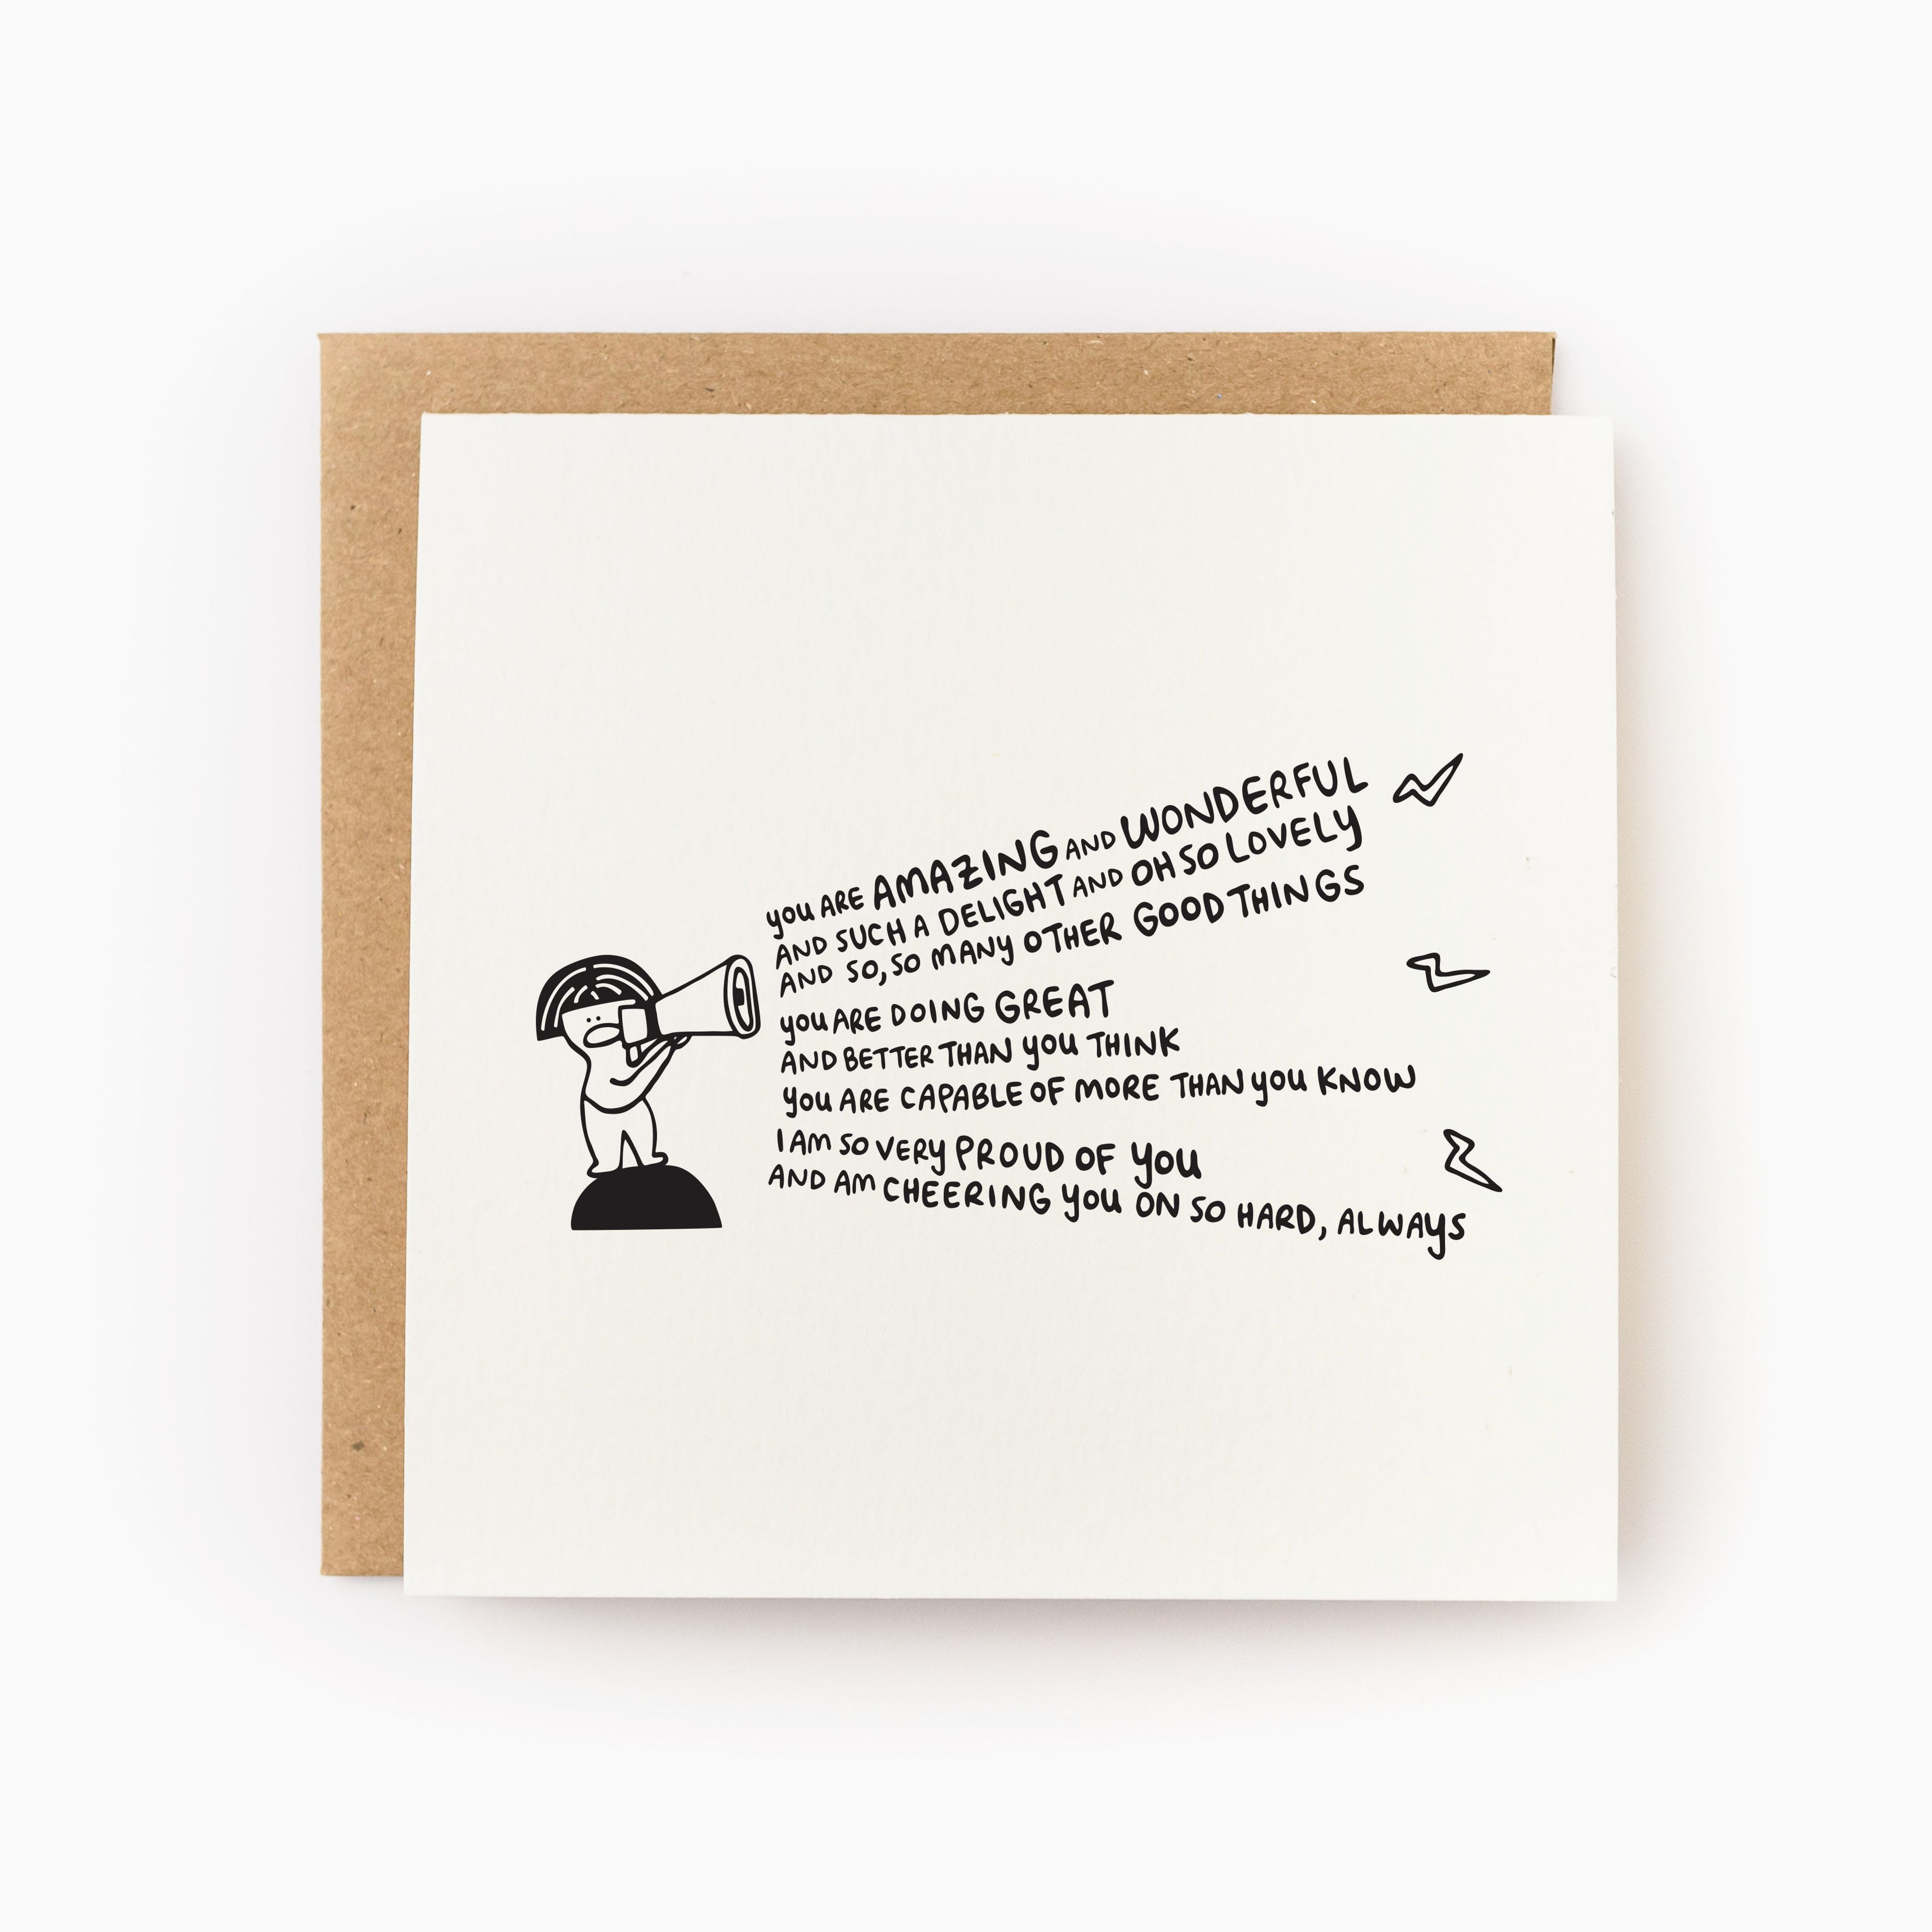 Cheering You On Letterpress Card